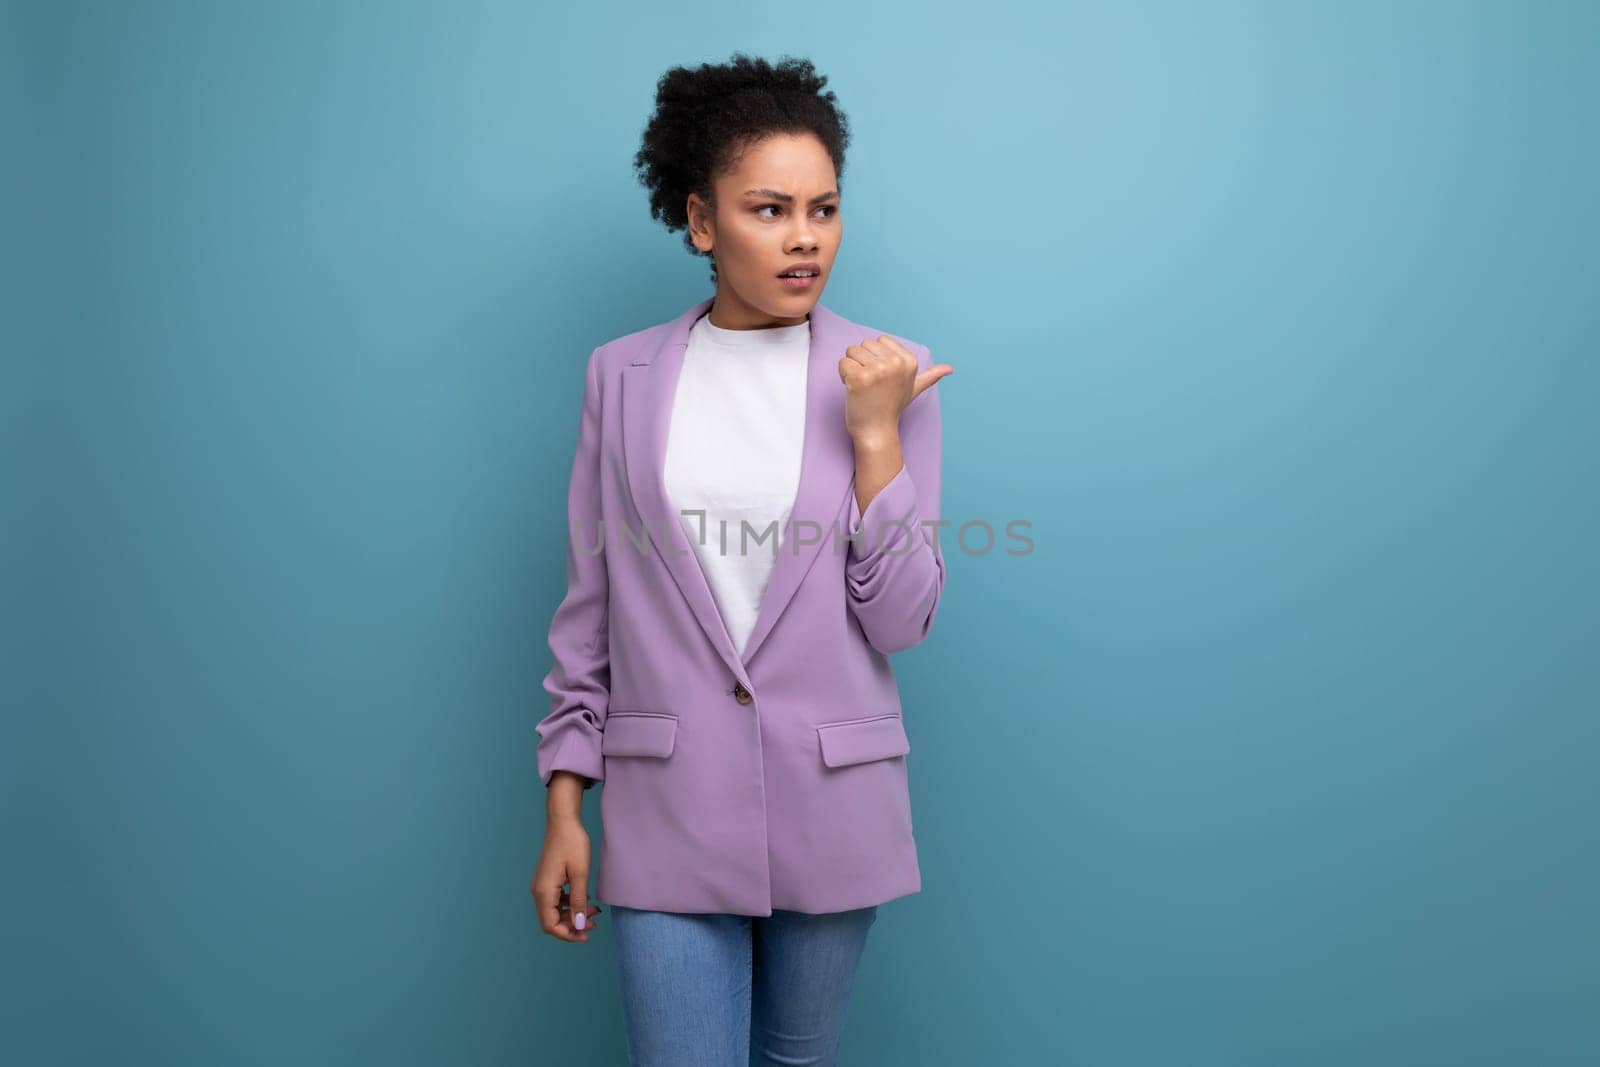 young latin business woman with ponytail hairstyle dressed in purple jacket on studio background with copy space.